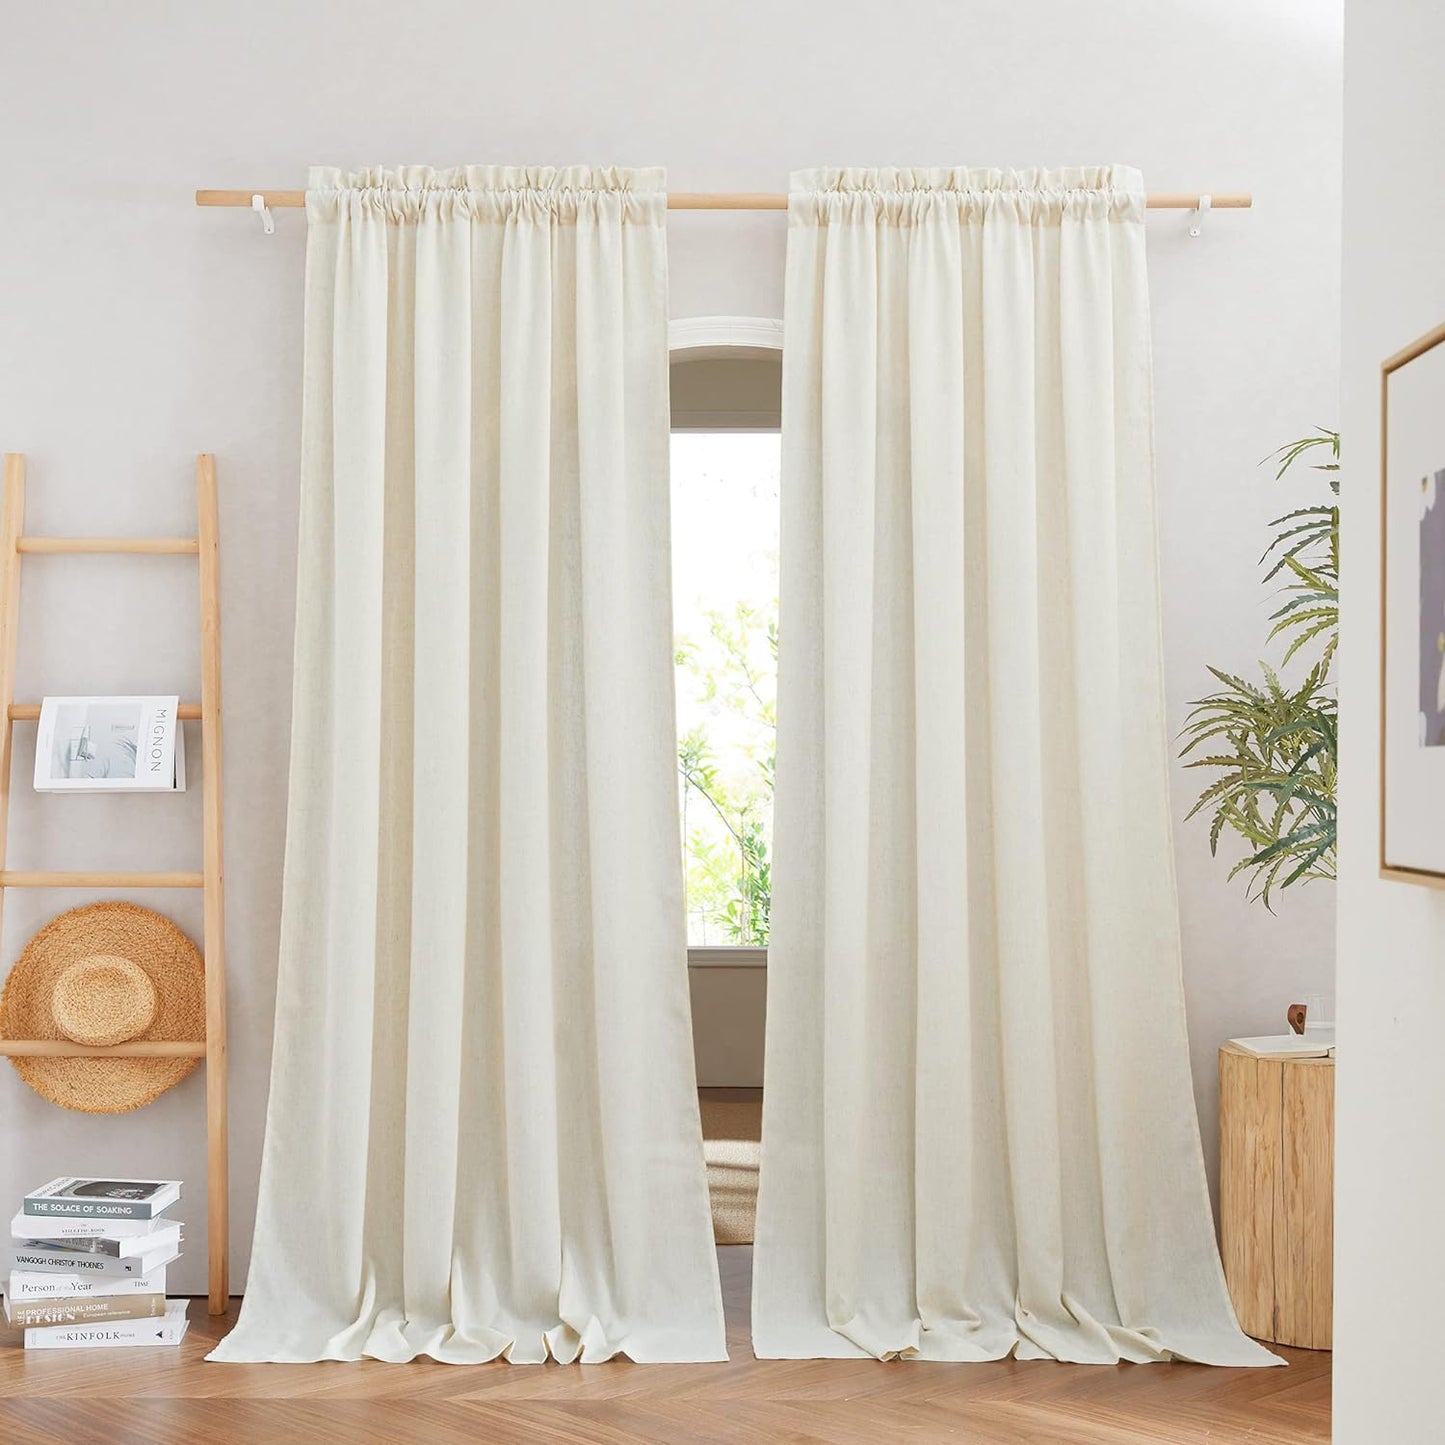 NICETOWN Natural Linen Curtains & Drapes for Windows 84 Inch Long, Rod Pocket Thick Flax Semi Sheer Privacy Assured with Light Filtering for Bedroom/Living Room, W55 X L84, 2 Pieces  NICETOWN Off White W55 X L108 